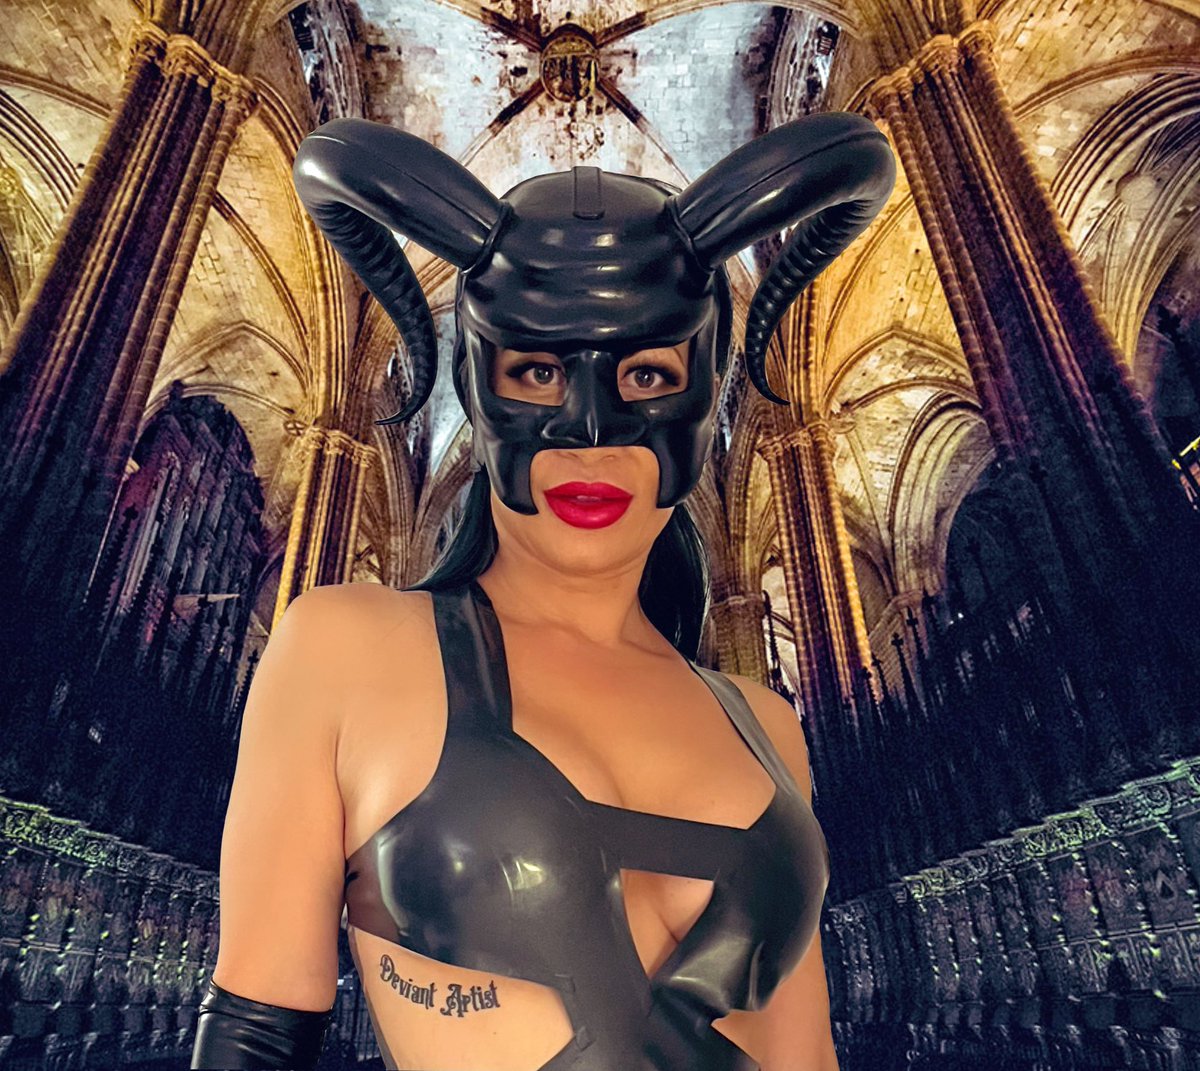 I don’t usually roleplay as the devil but the *hour* it happened my sobriety app changed from 665 to 666 days. Truth is stranger than fiction. Helmet courtesy of @SoldierSatans 😈